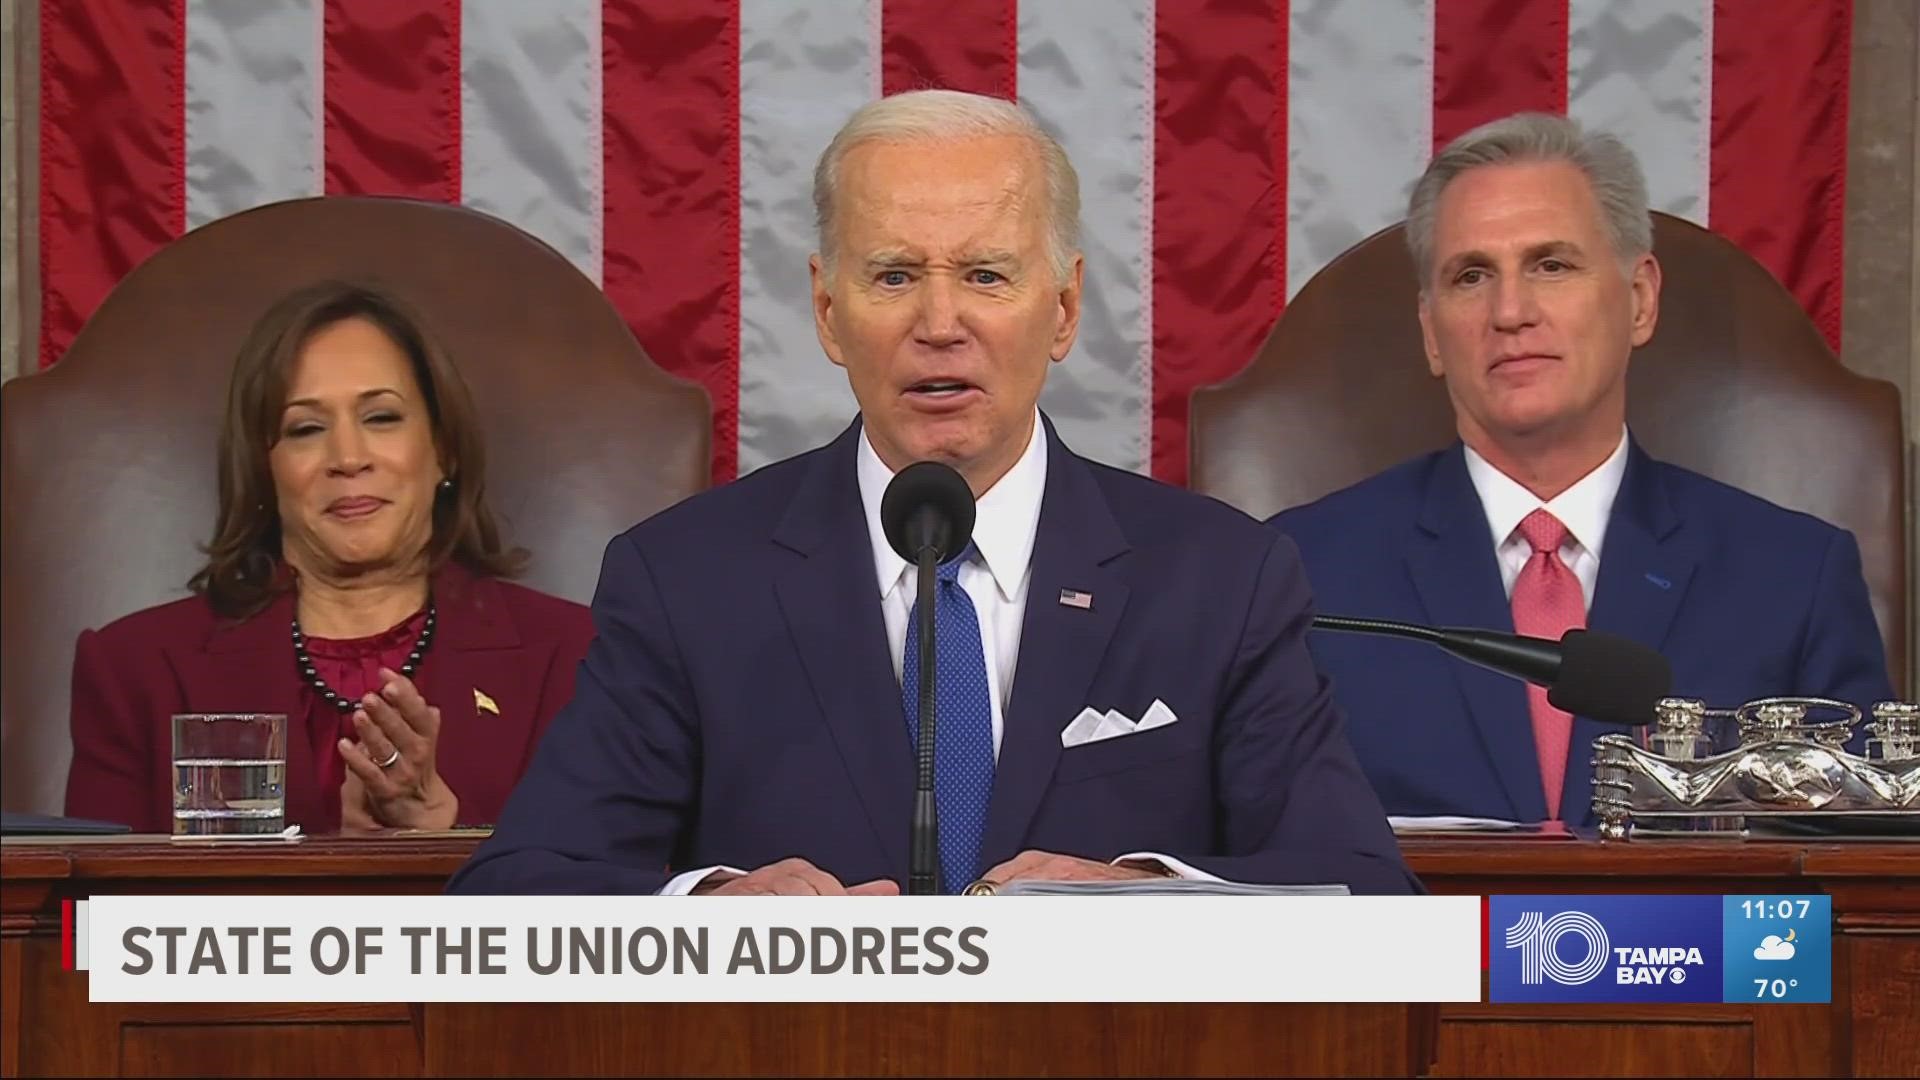 Throughout his speech, Biden sought to portray a nation dramatically different in positive ways from the one he took charge of two years ago.